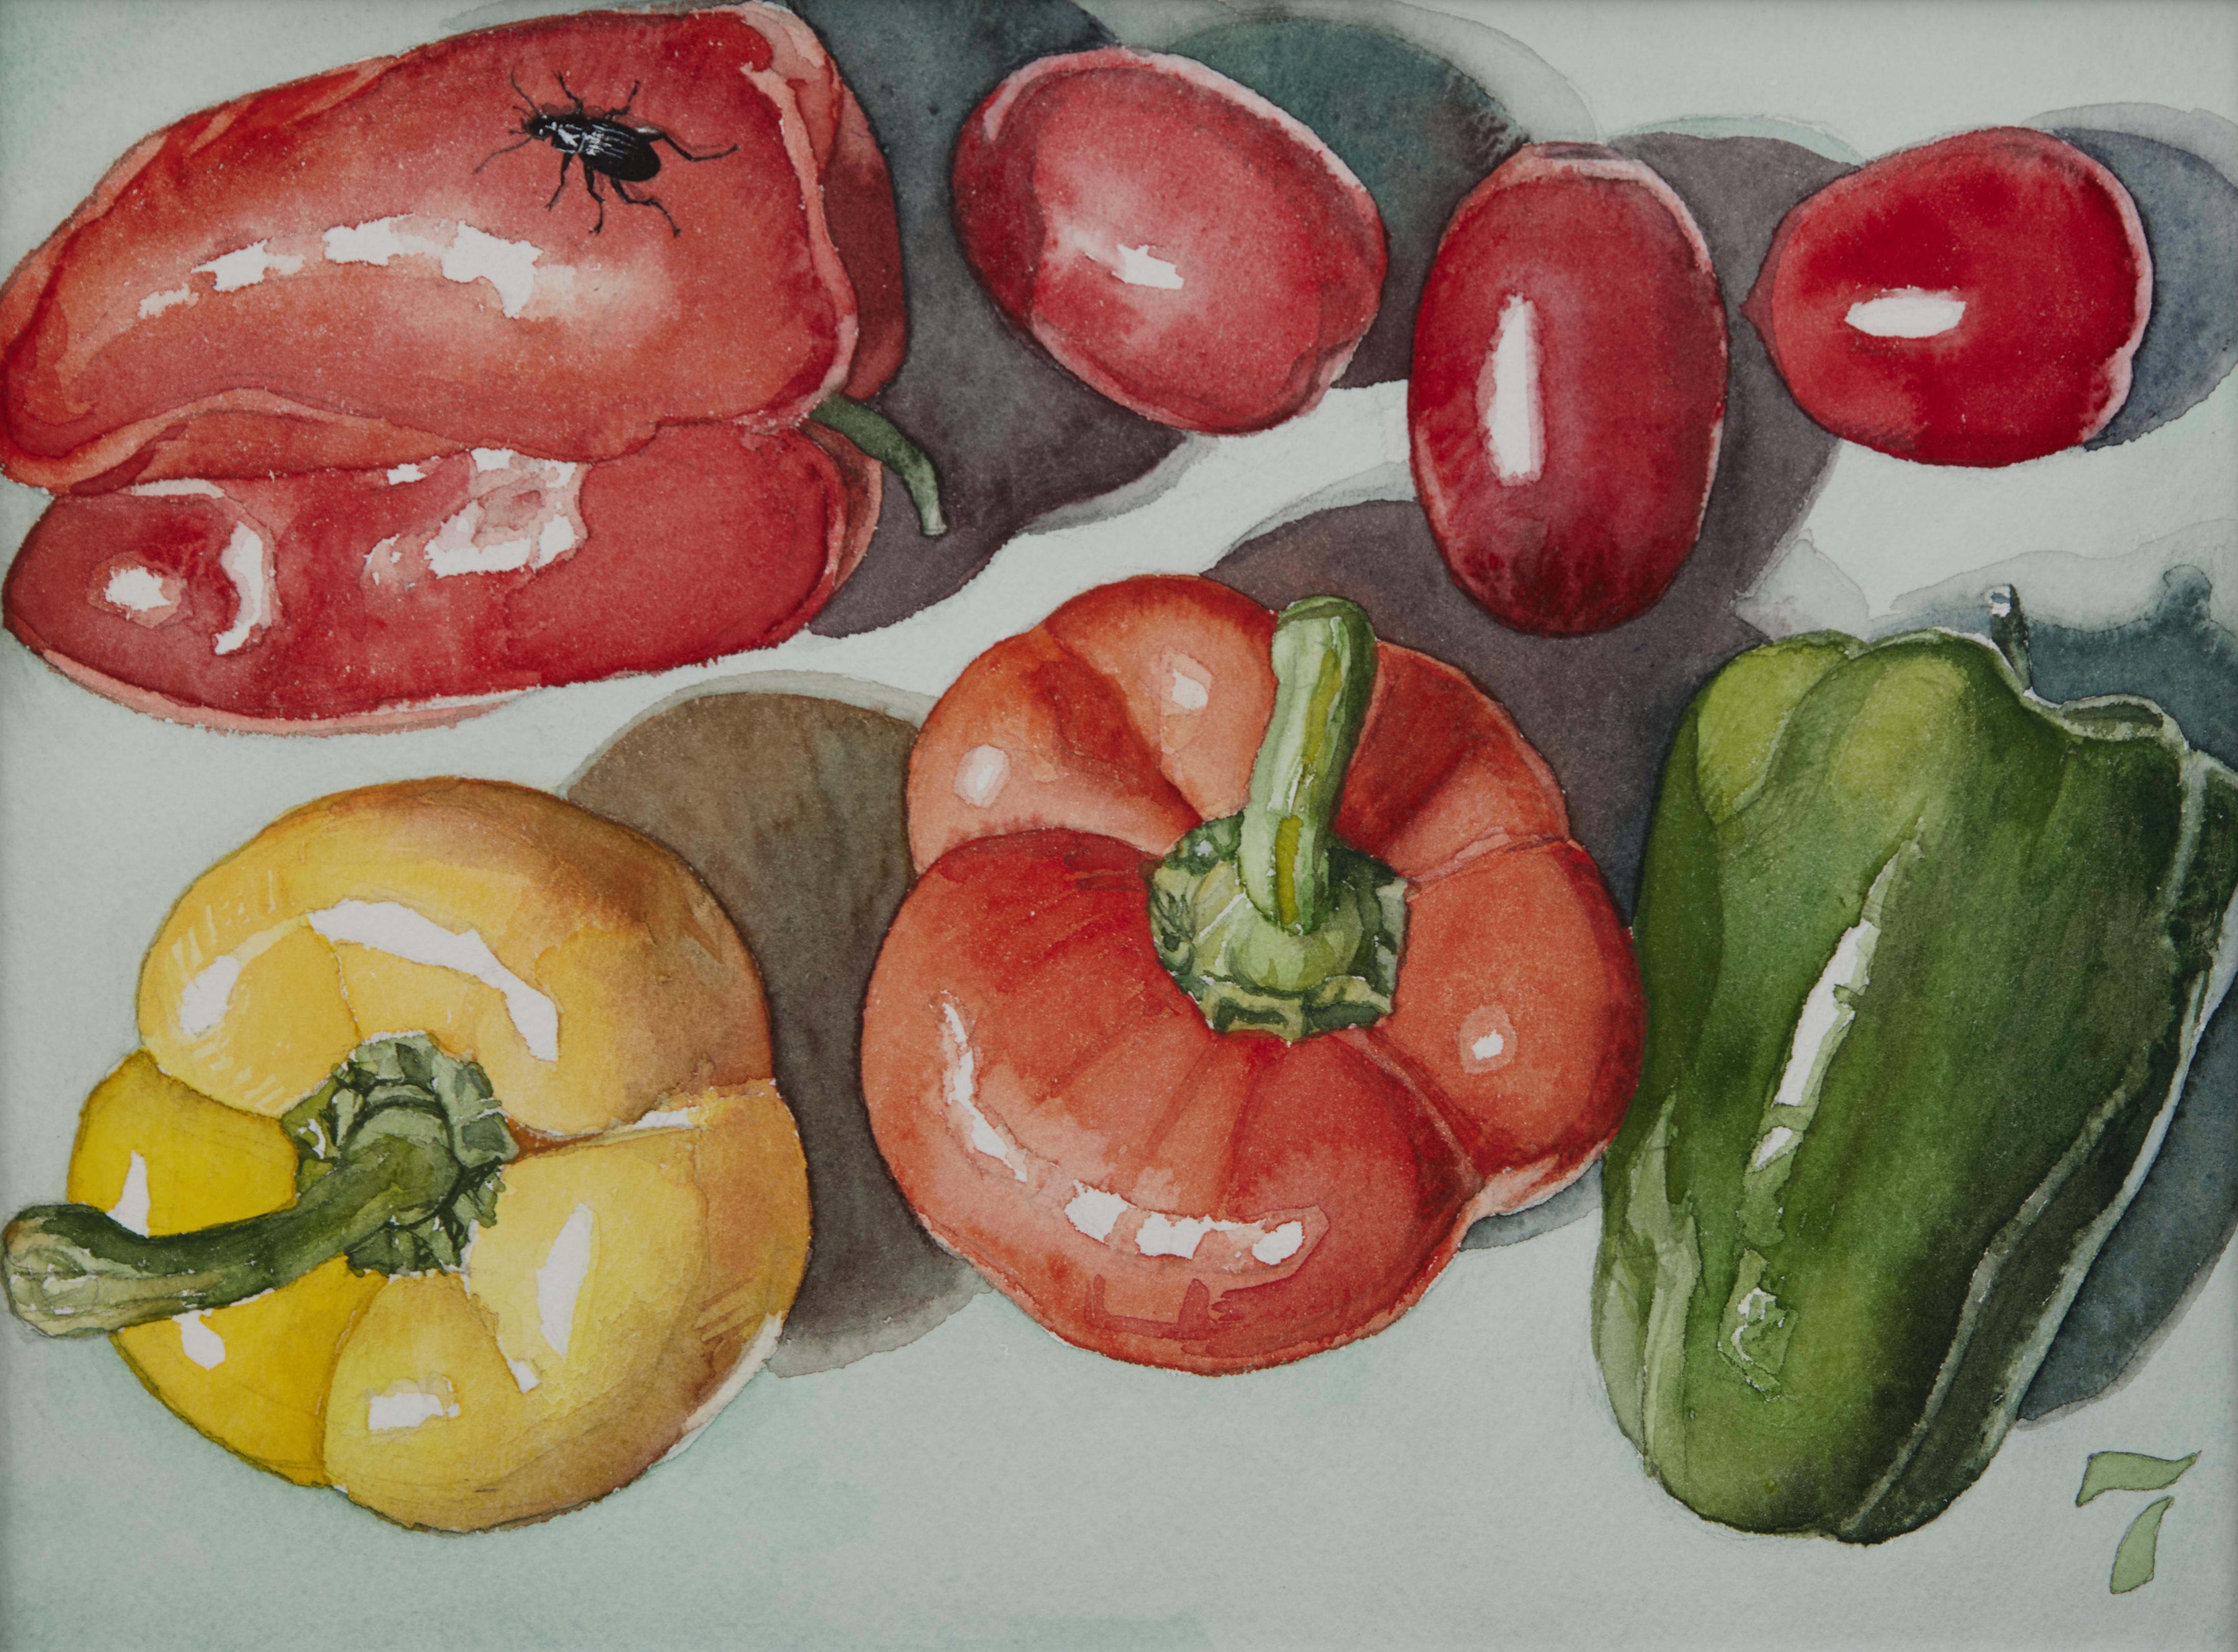 Vegetable Still Life No. 7, Contemporary watercolor by Ohio trompe l'oeil artist - Photorealist Art by George Mauersberger